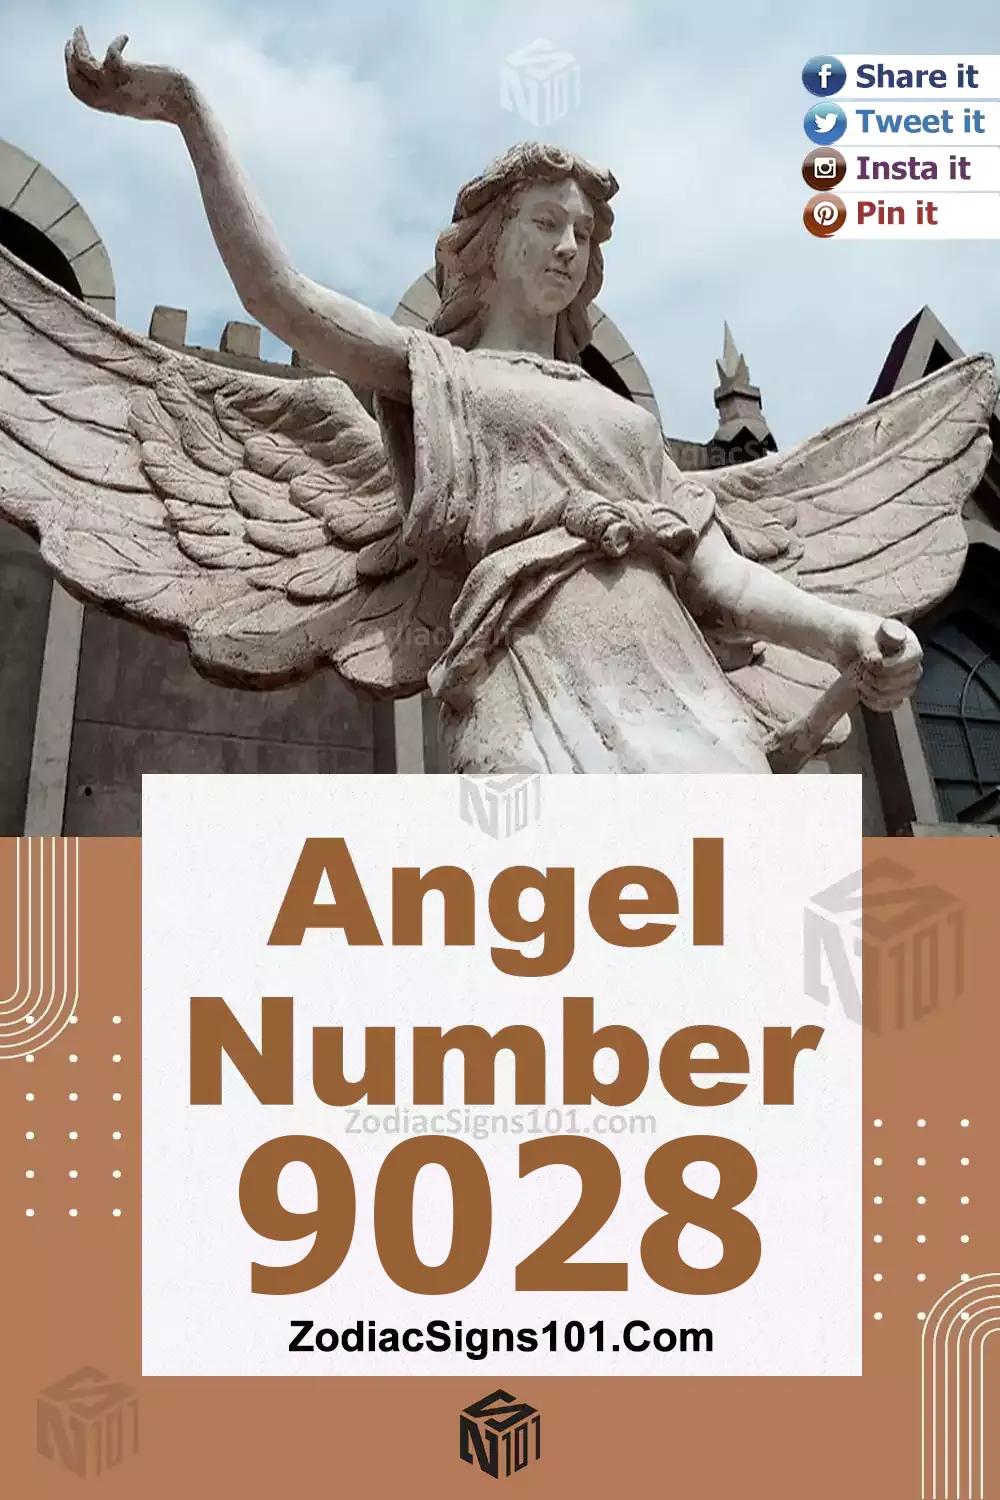 9028 Angel Number Meaning